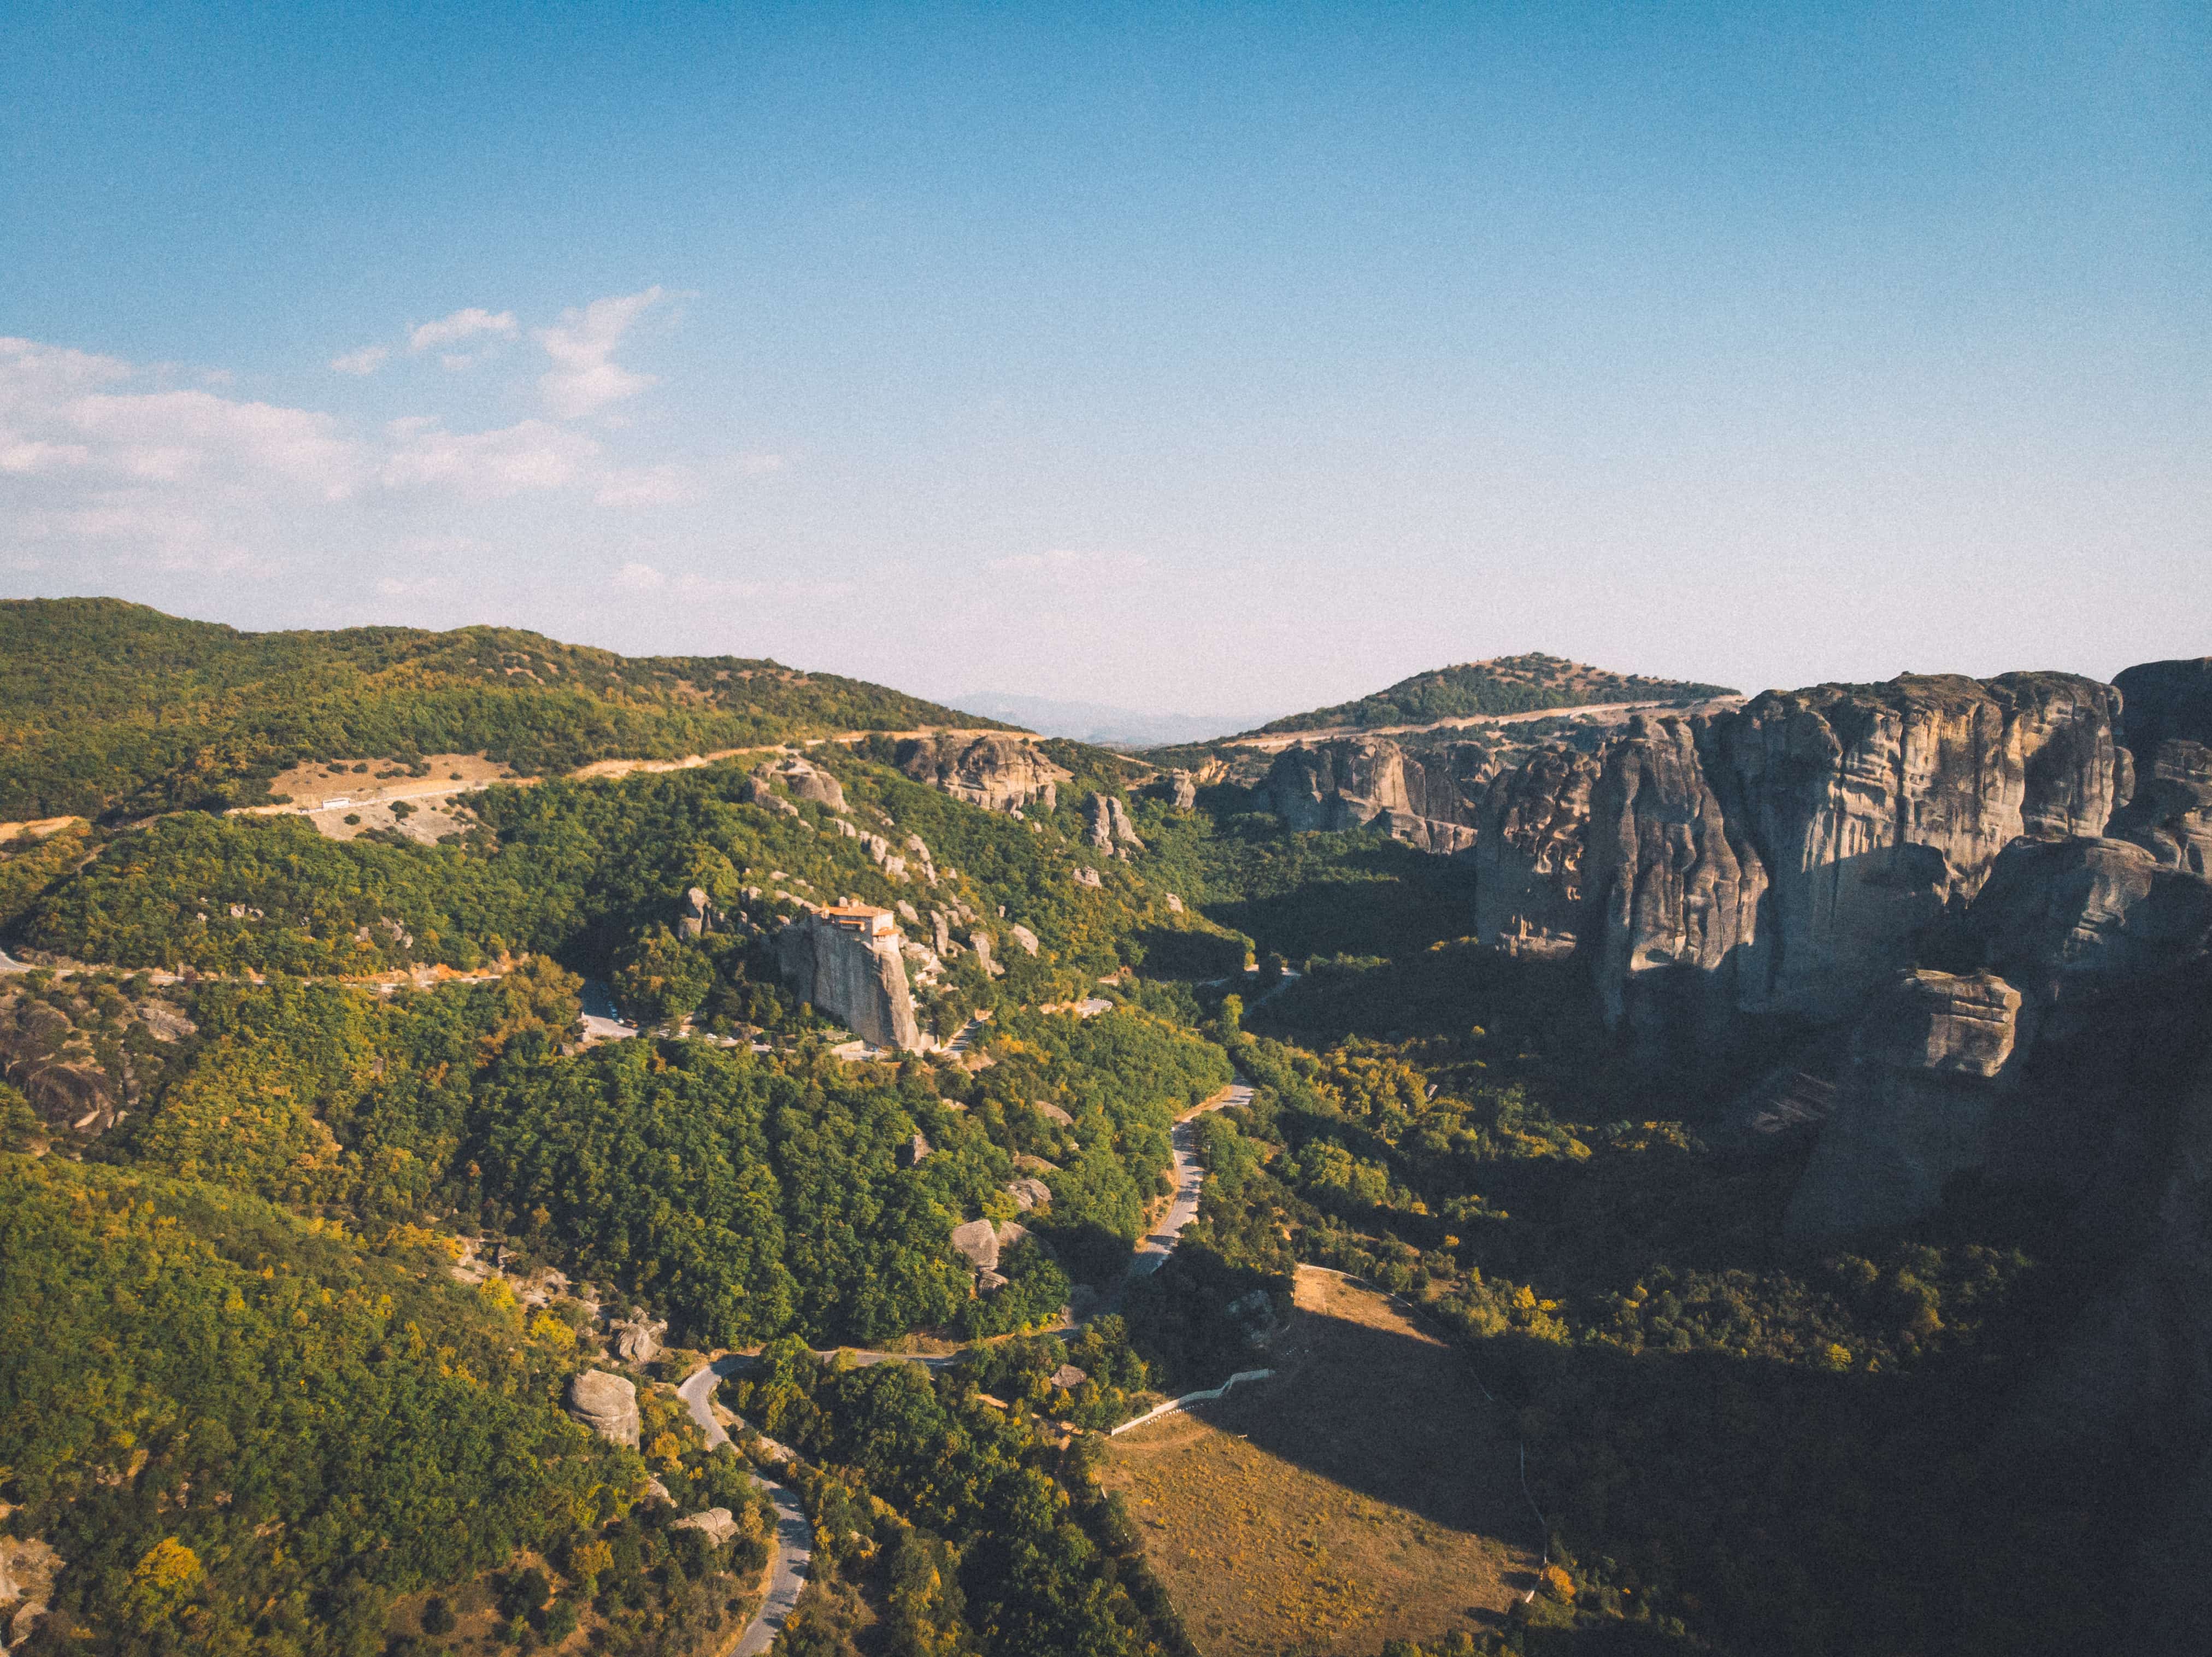 How to get to Meteora from Athens and how to get to Meteora from Thessaloniki. All things to do in Meteora, where to stay in Meteora, monasteries to visit in Meteora